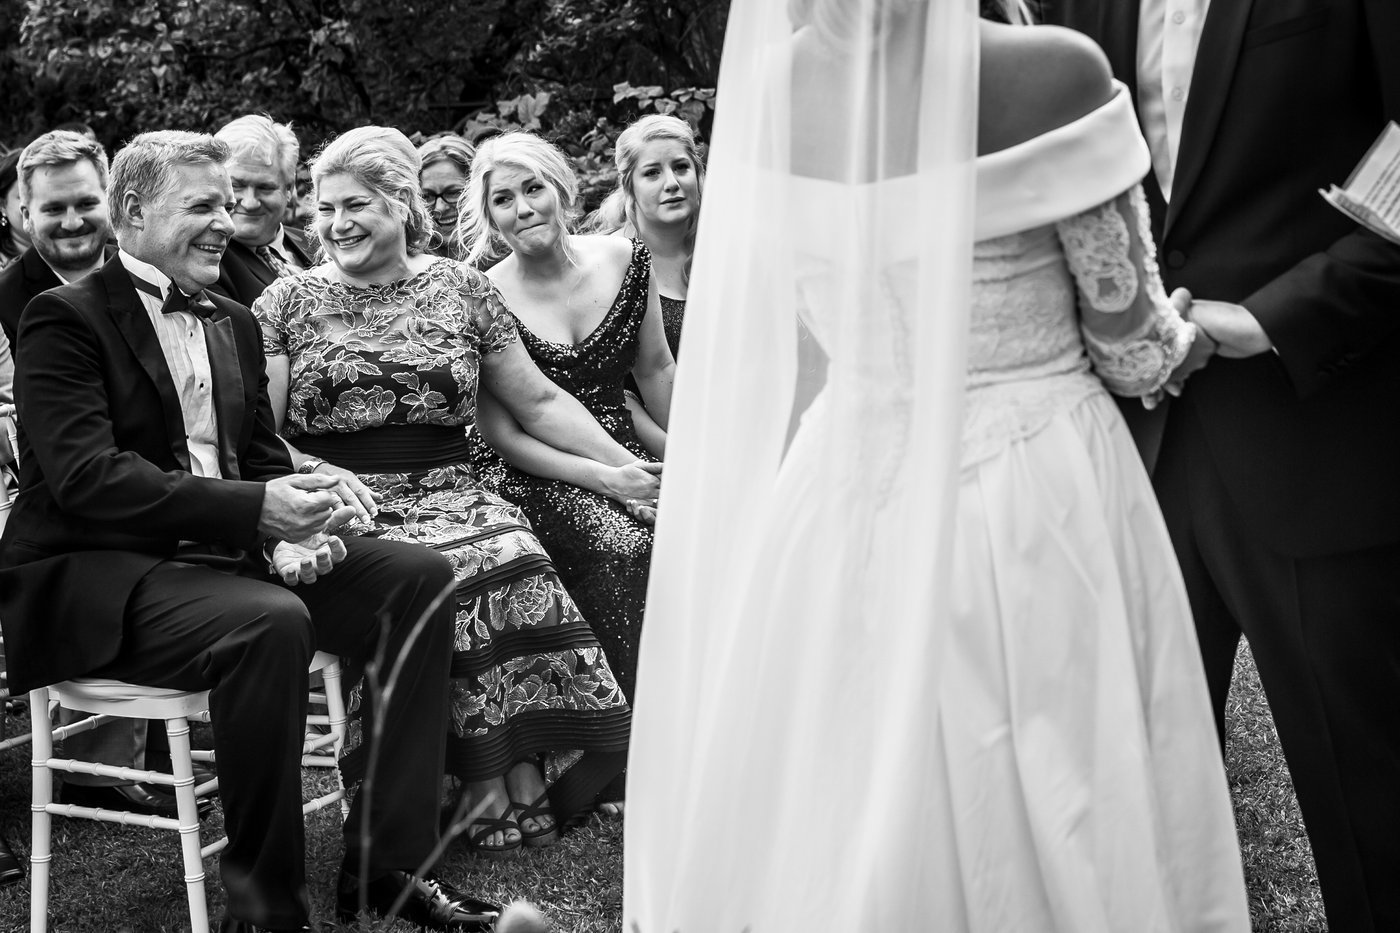 Family laughing and smiling during outdoor wedding ceremony